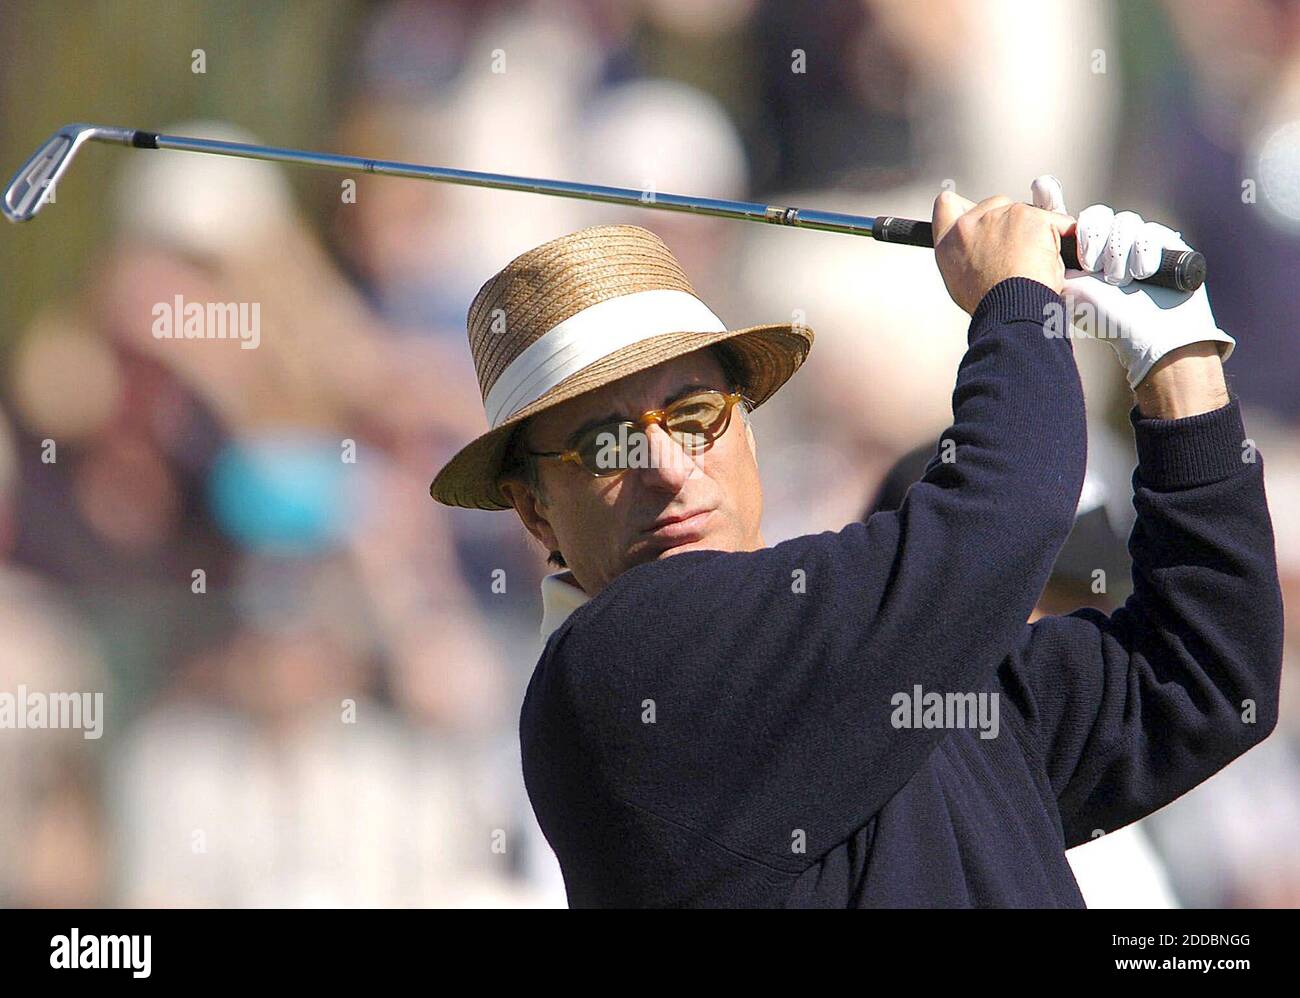 NO FILM, NO VIDEO, NO TV, NO DOCUMENTARY - Actor Andy Garcia tees off the 17th hole during the 3M Celebrity Challenge at the AT&T Pebble Beach National Pro-Am golf tournament at Pebble Beach, California, Wednesday, February 8, 2006. Photo by Jose Carlos Fajardo/Contra Costa Times/KRT/ABACAPRESS.COM Stock Photo